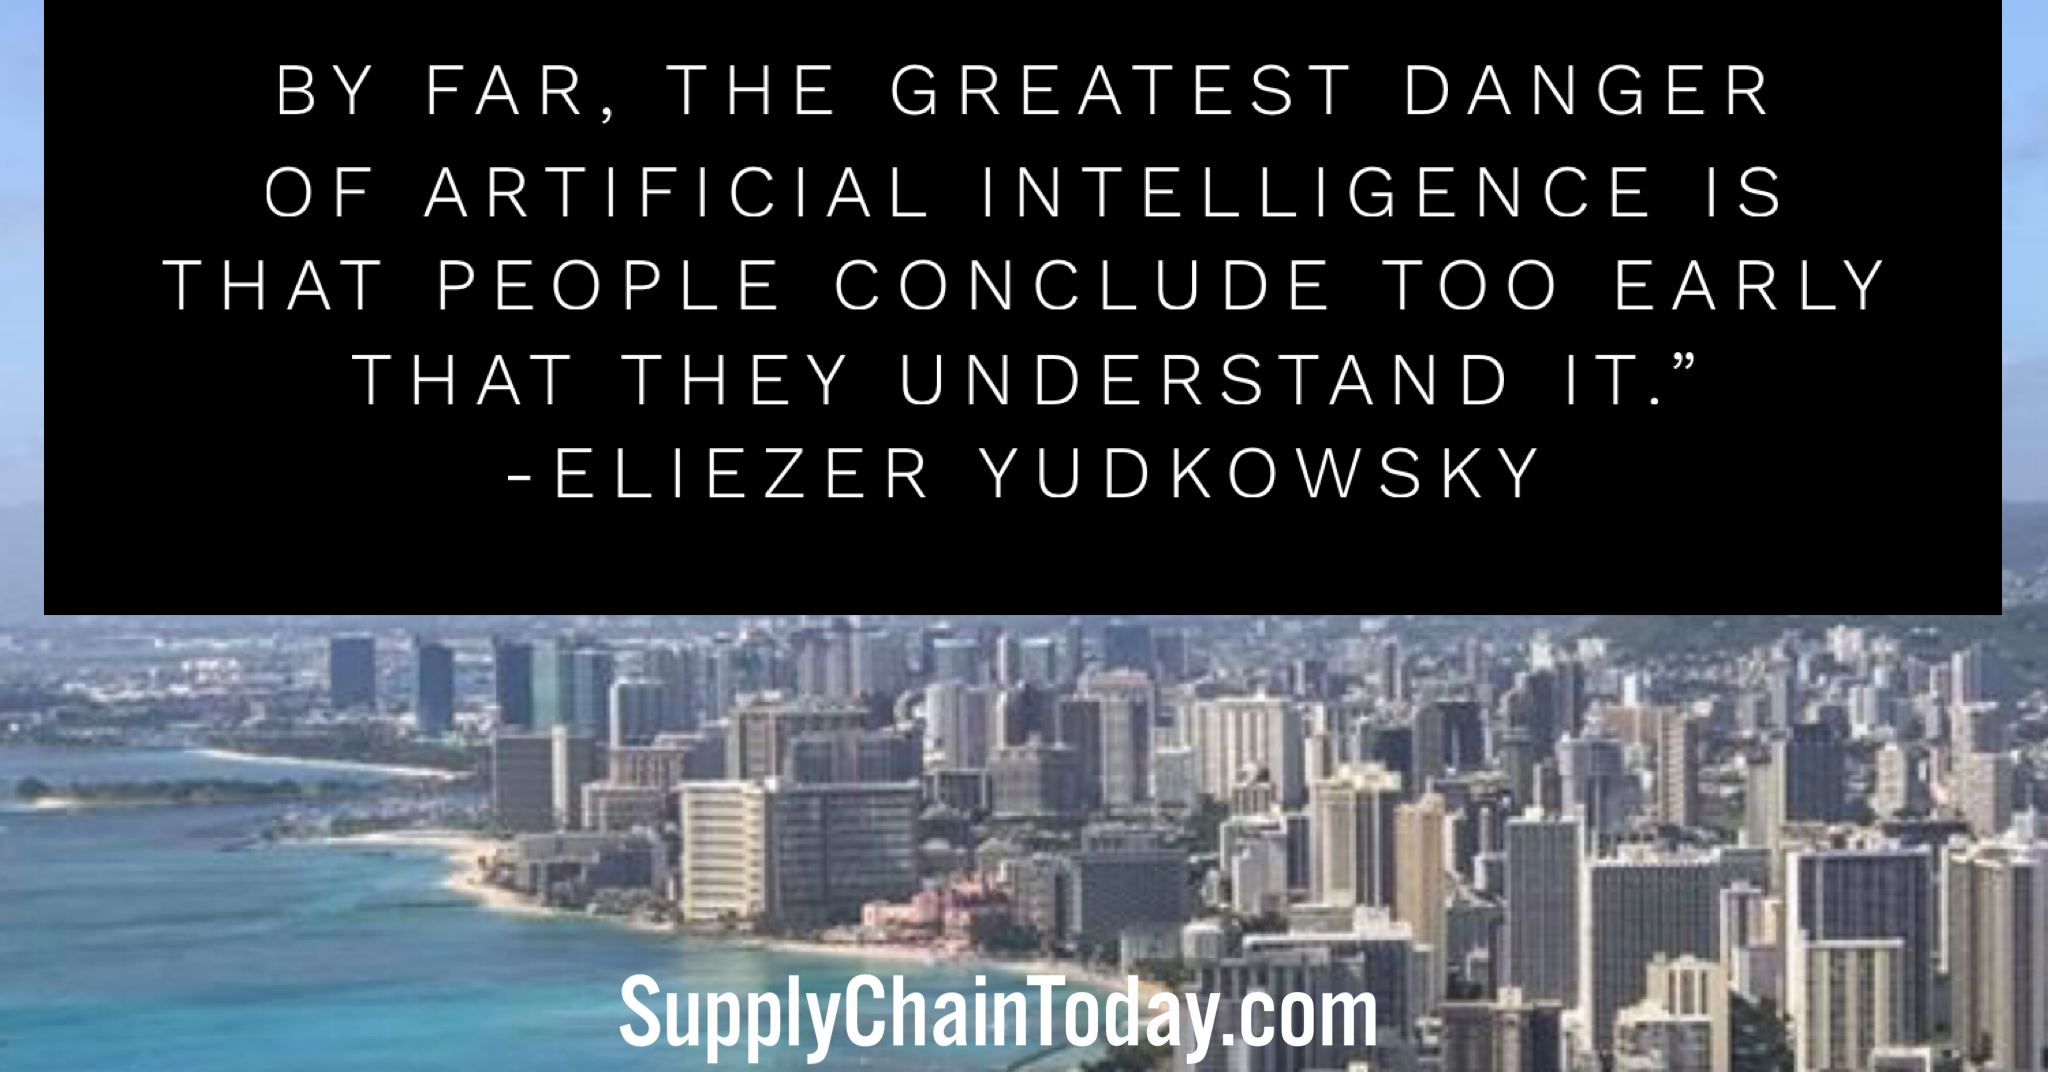 Summary] Eliezer Yudkowsky: Dangers of AI and the End of Human Civilization